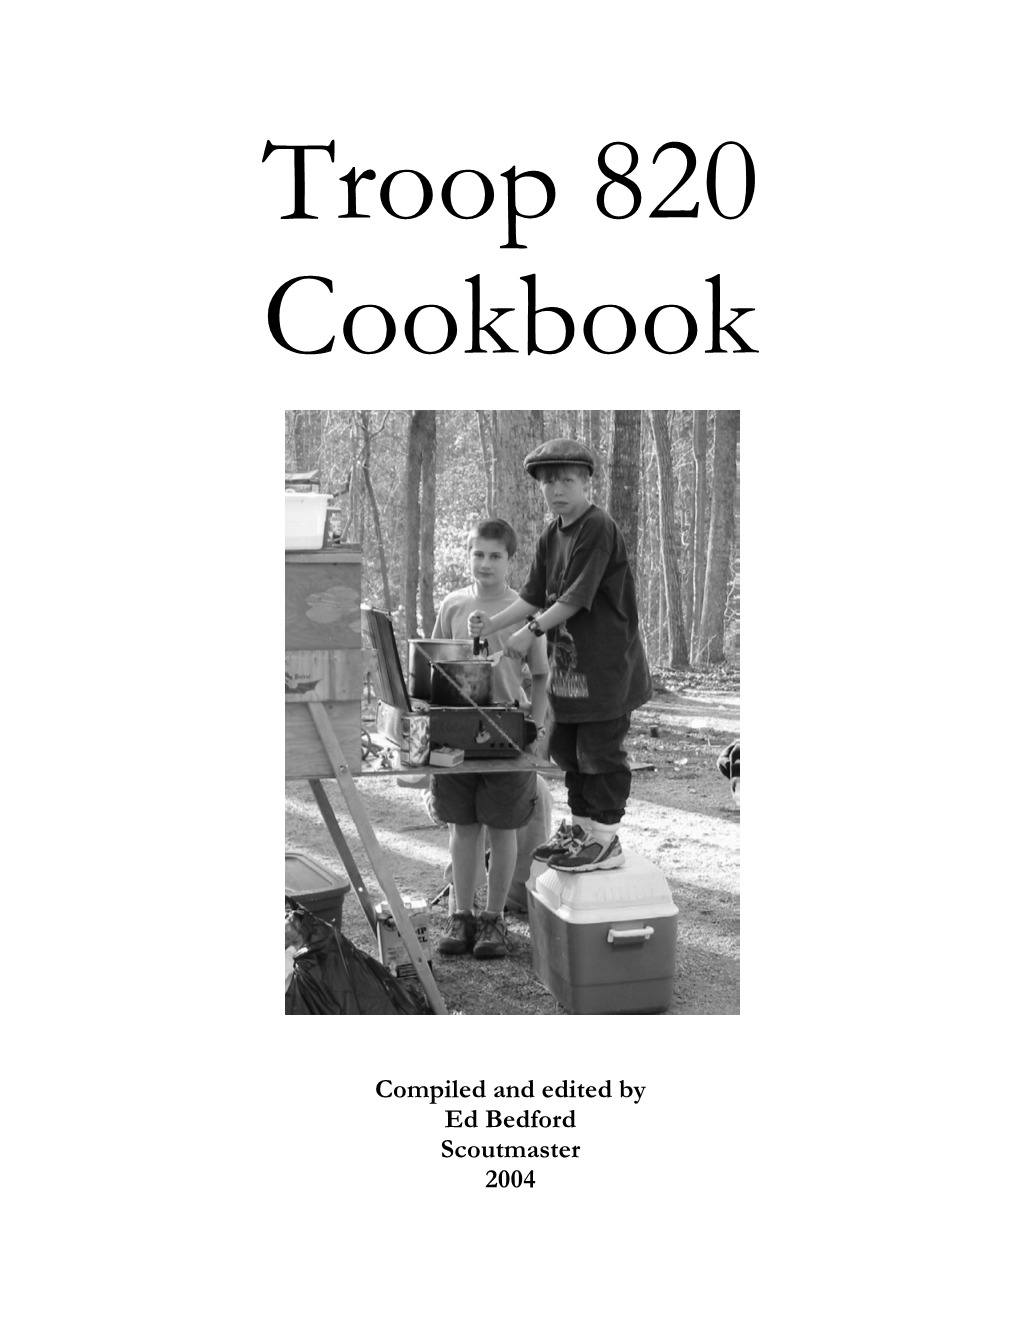 Compiled and Edited by Ed Bedford Scoutmaster 2004